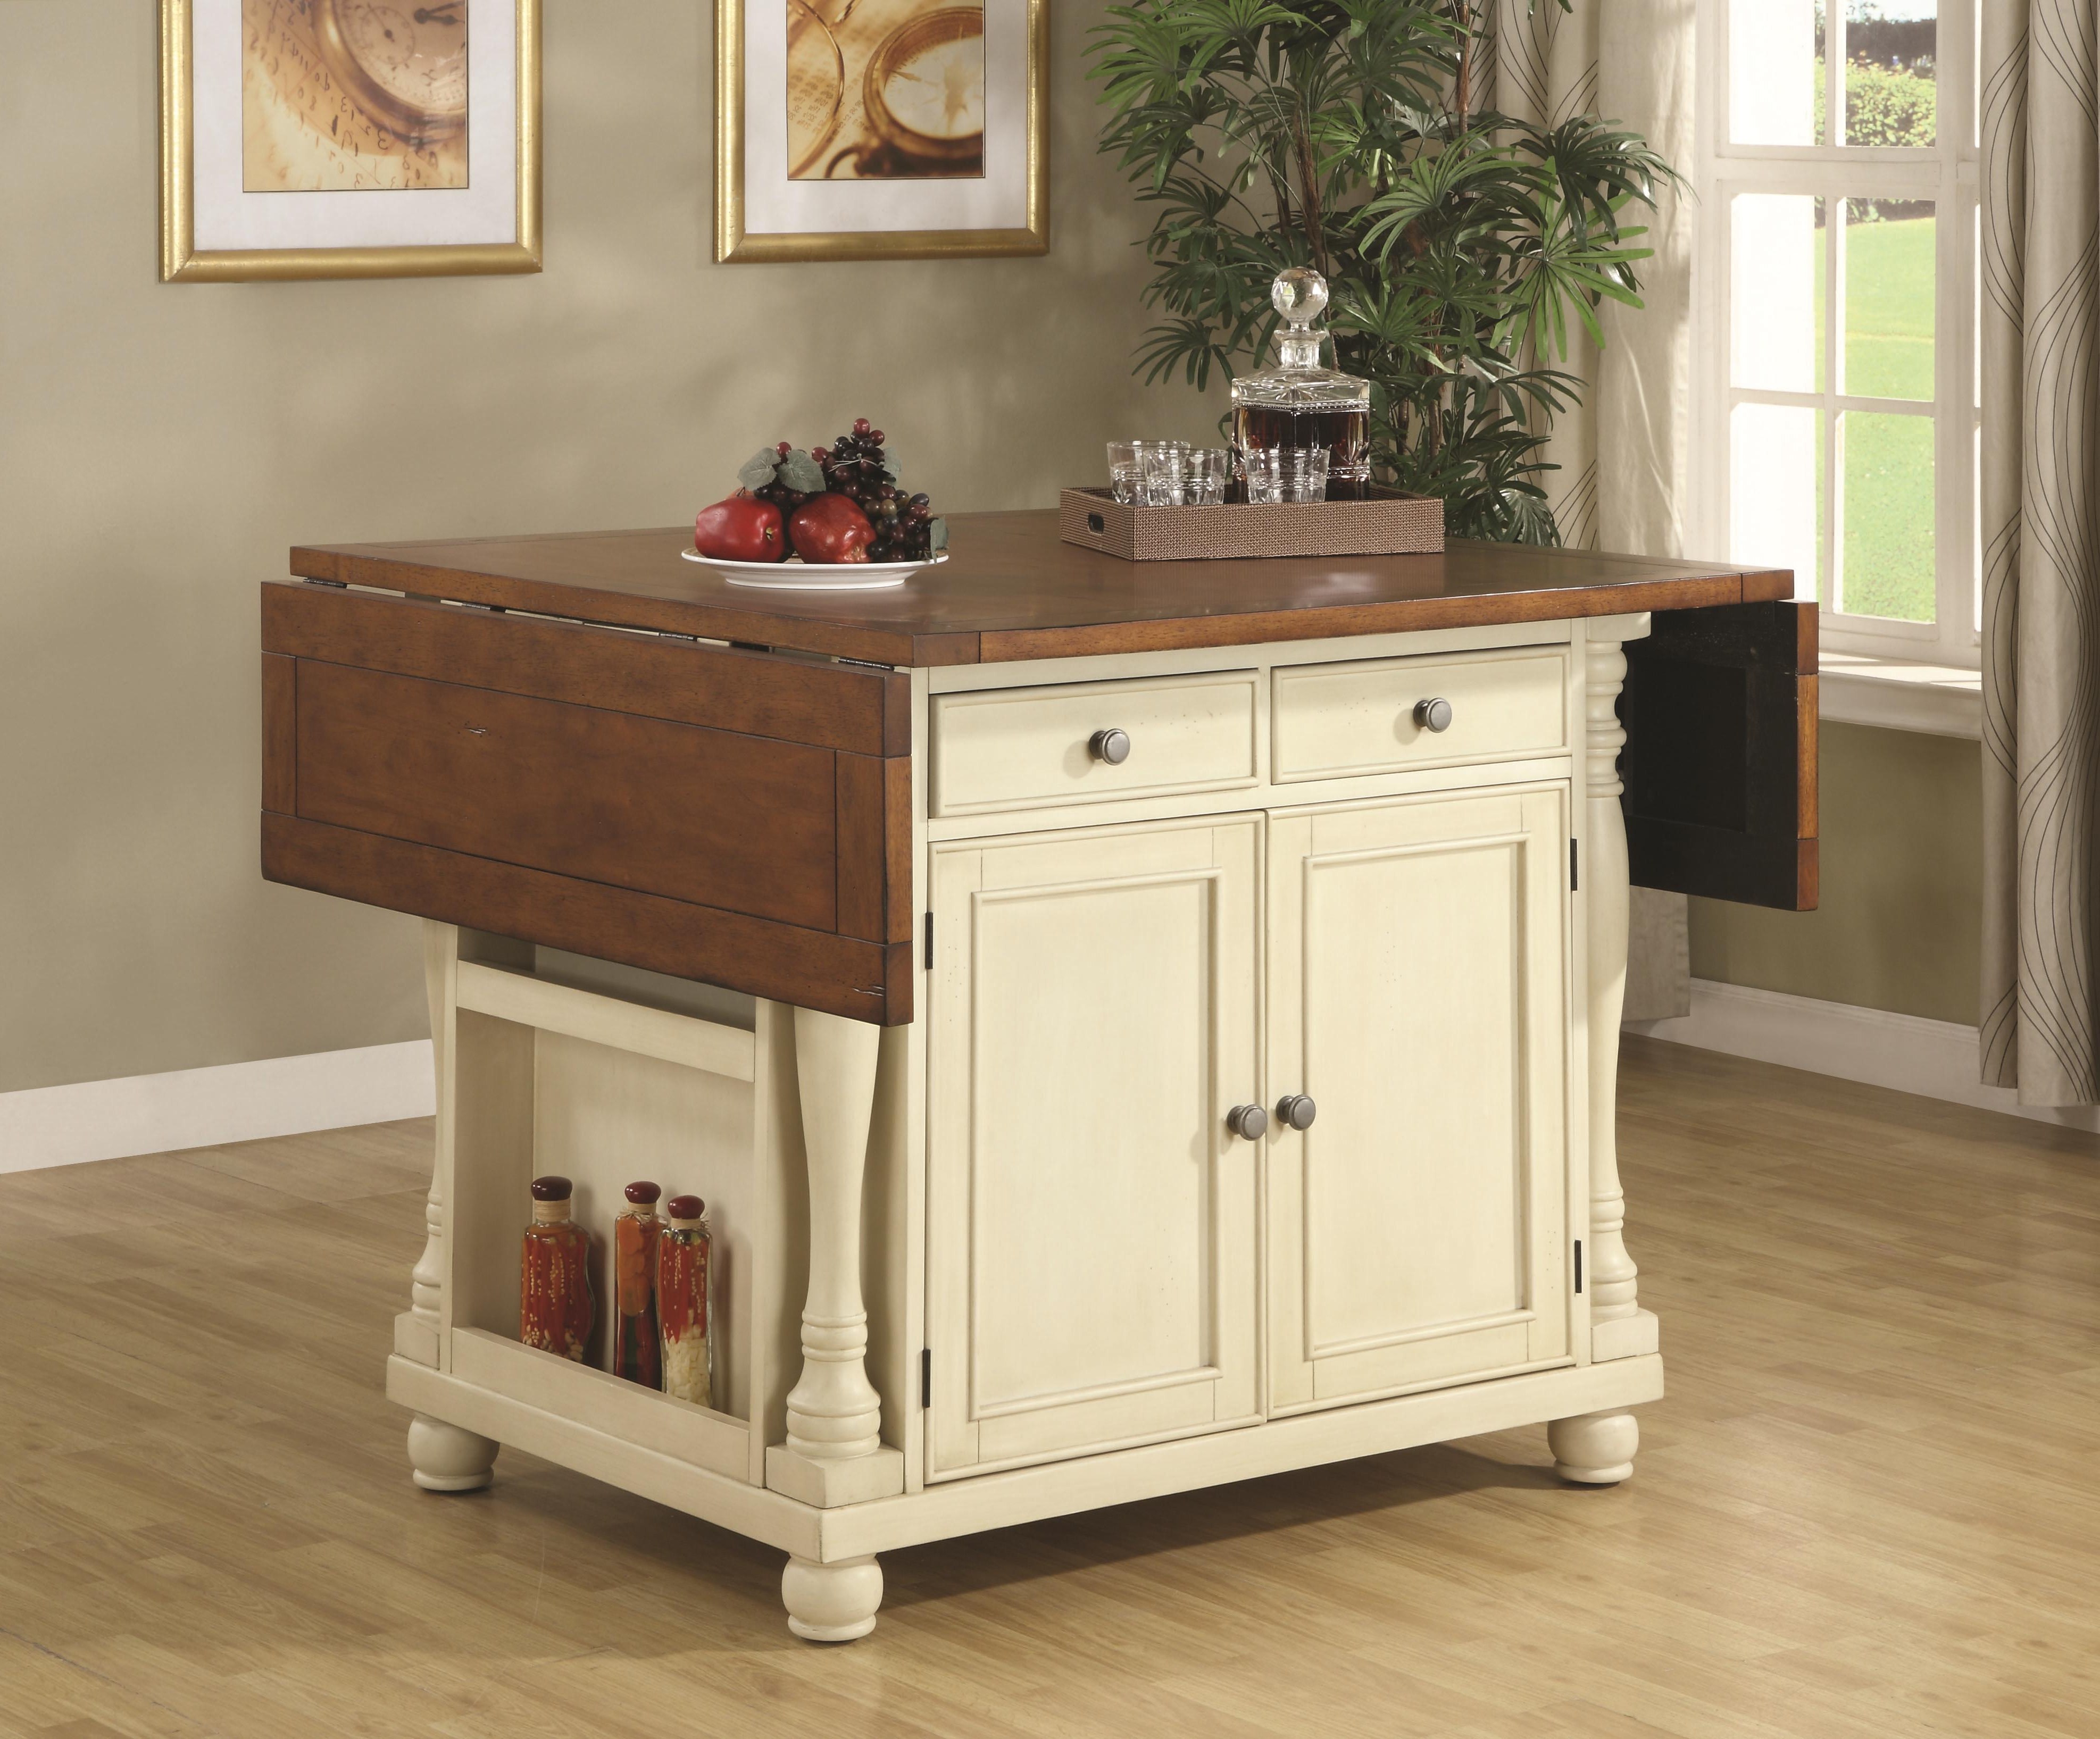 kitchen island cart drop leaf built dining table golden dome wood carts traditional mustard yellow accent wall white set engineered hardwood floor marble glass top coffee lighting